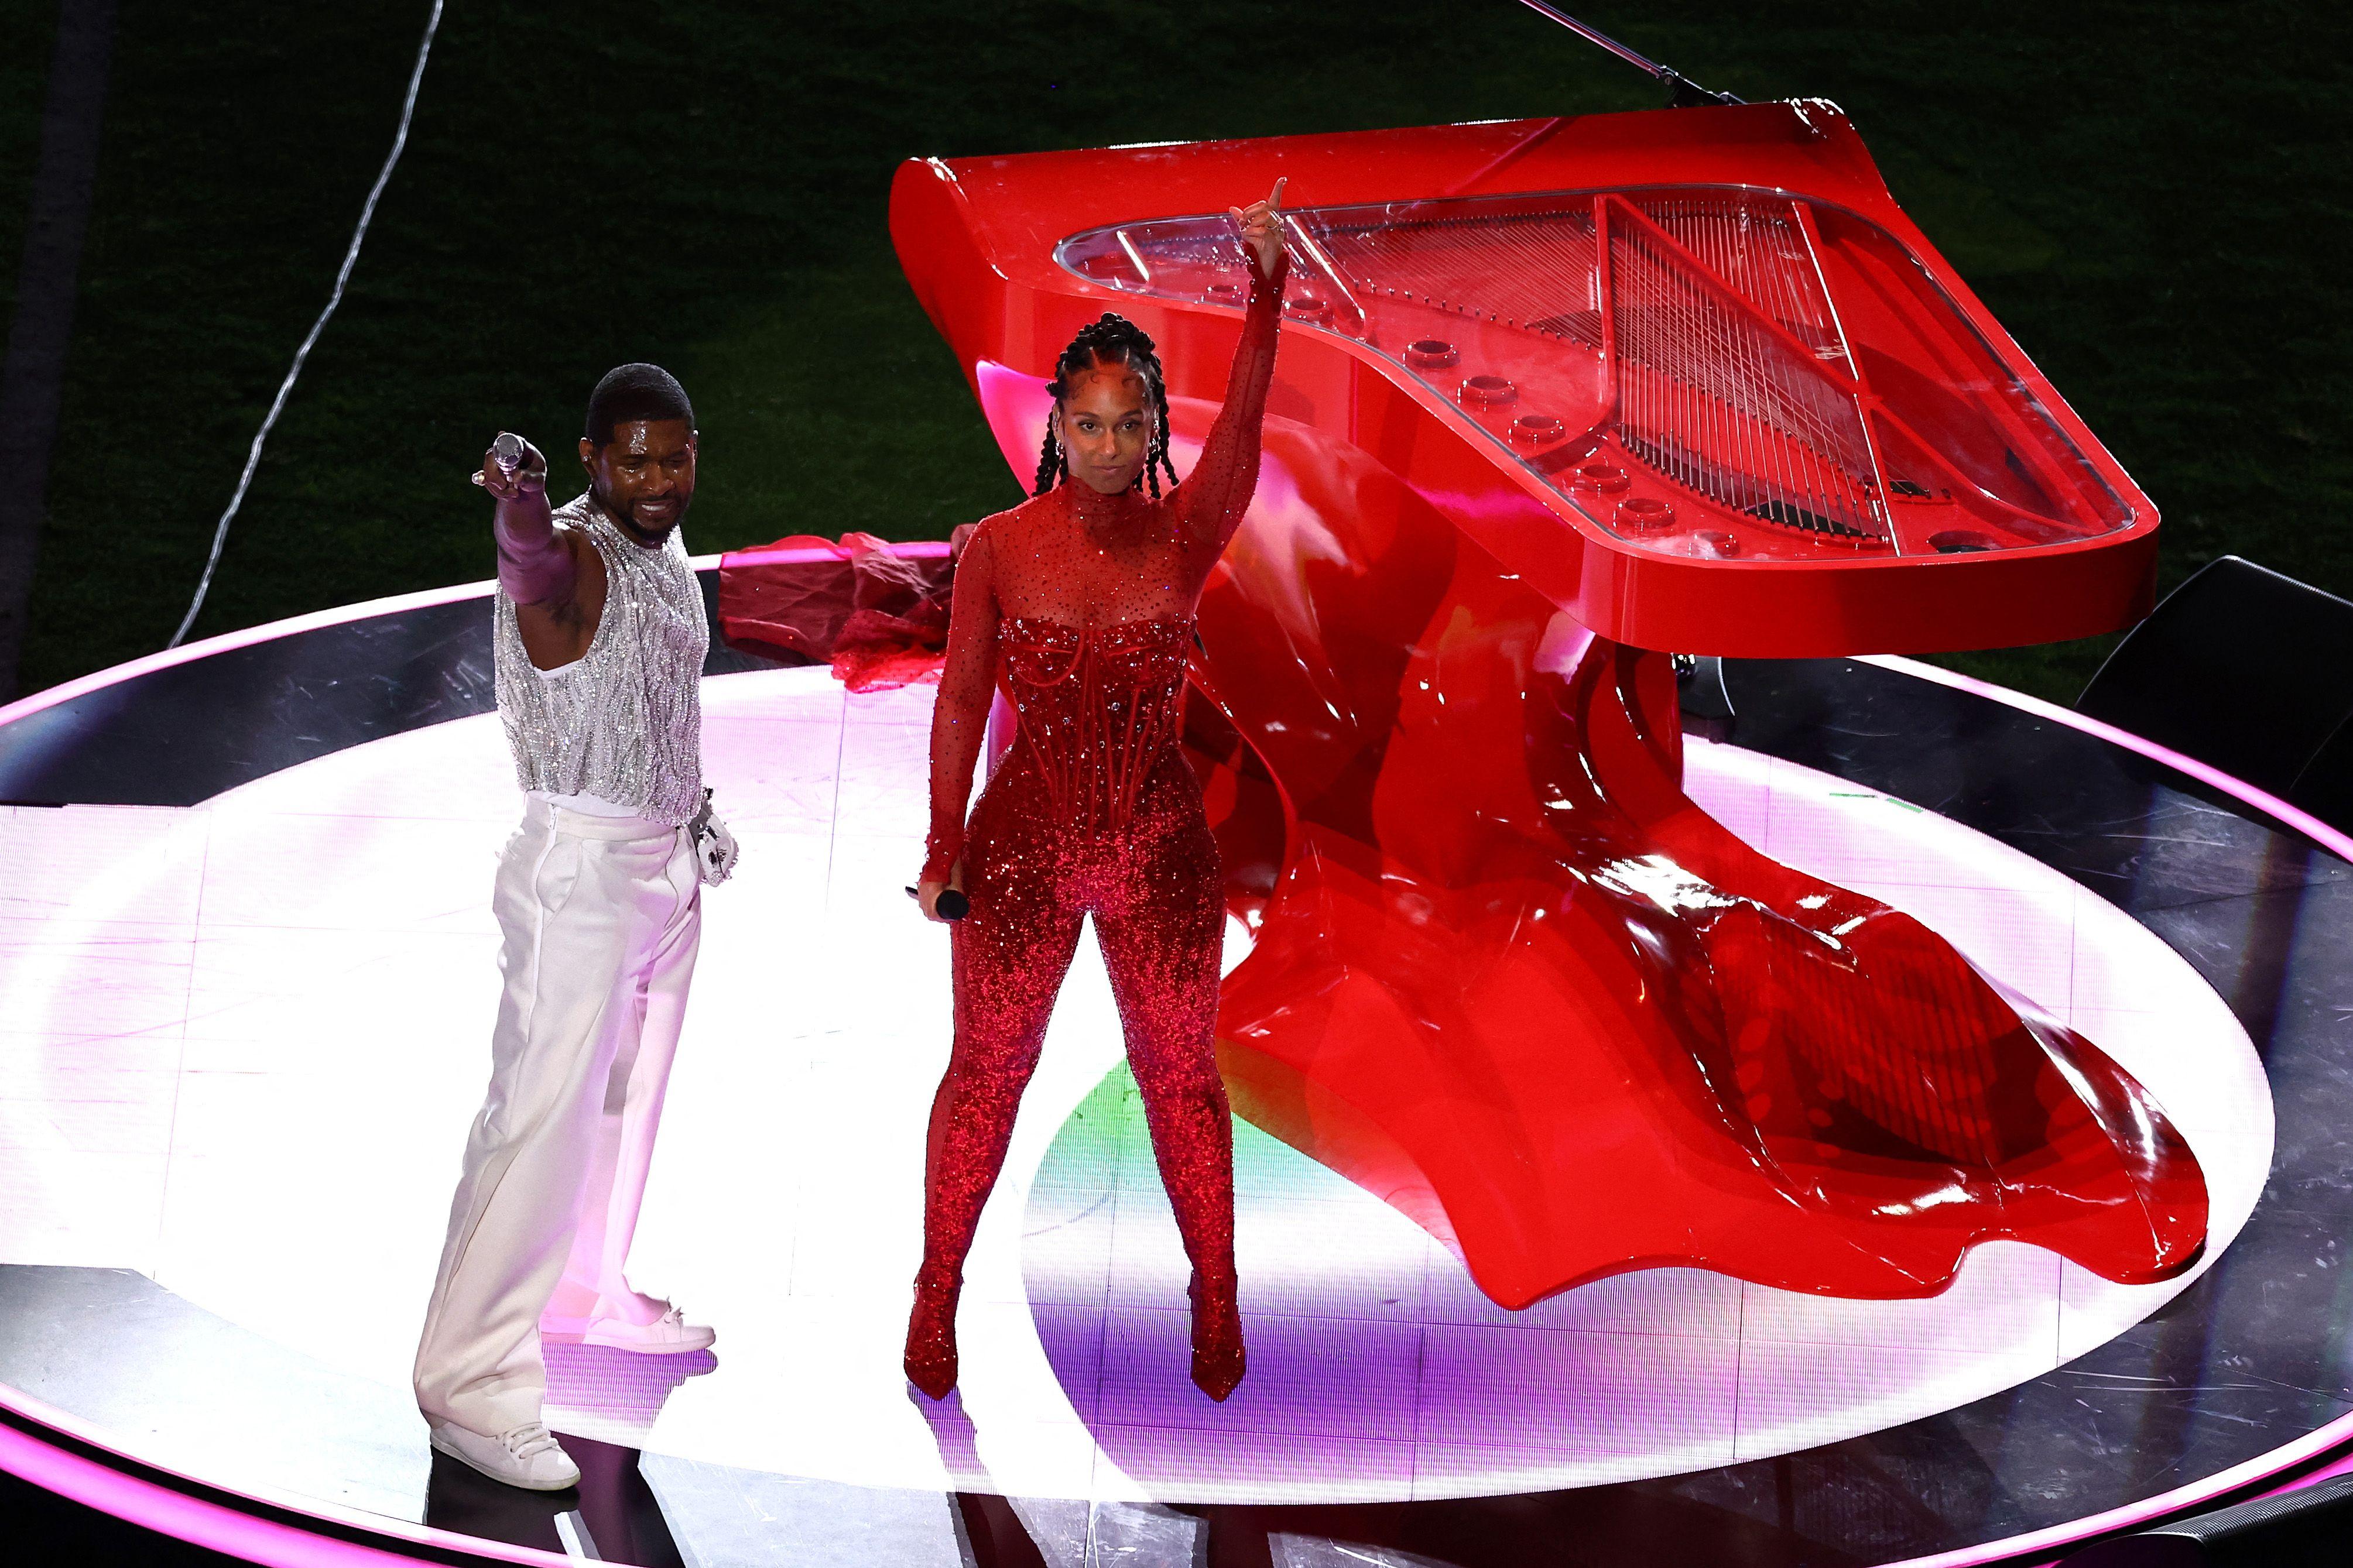 Alicia Keys appeared midway through at a futuristic red piano, playing a few bars of her own hit 